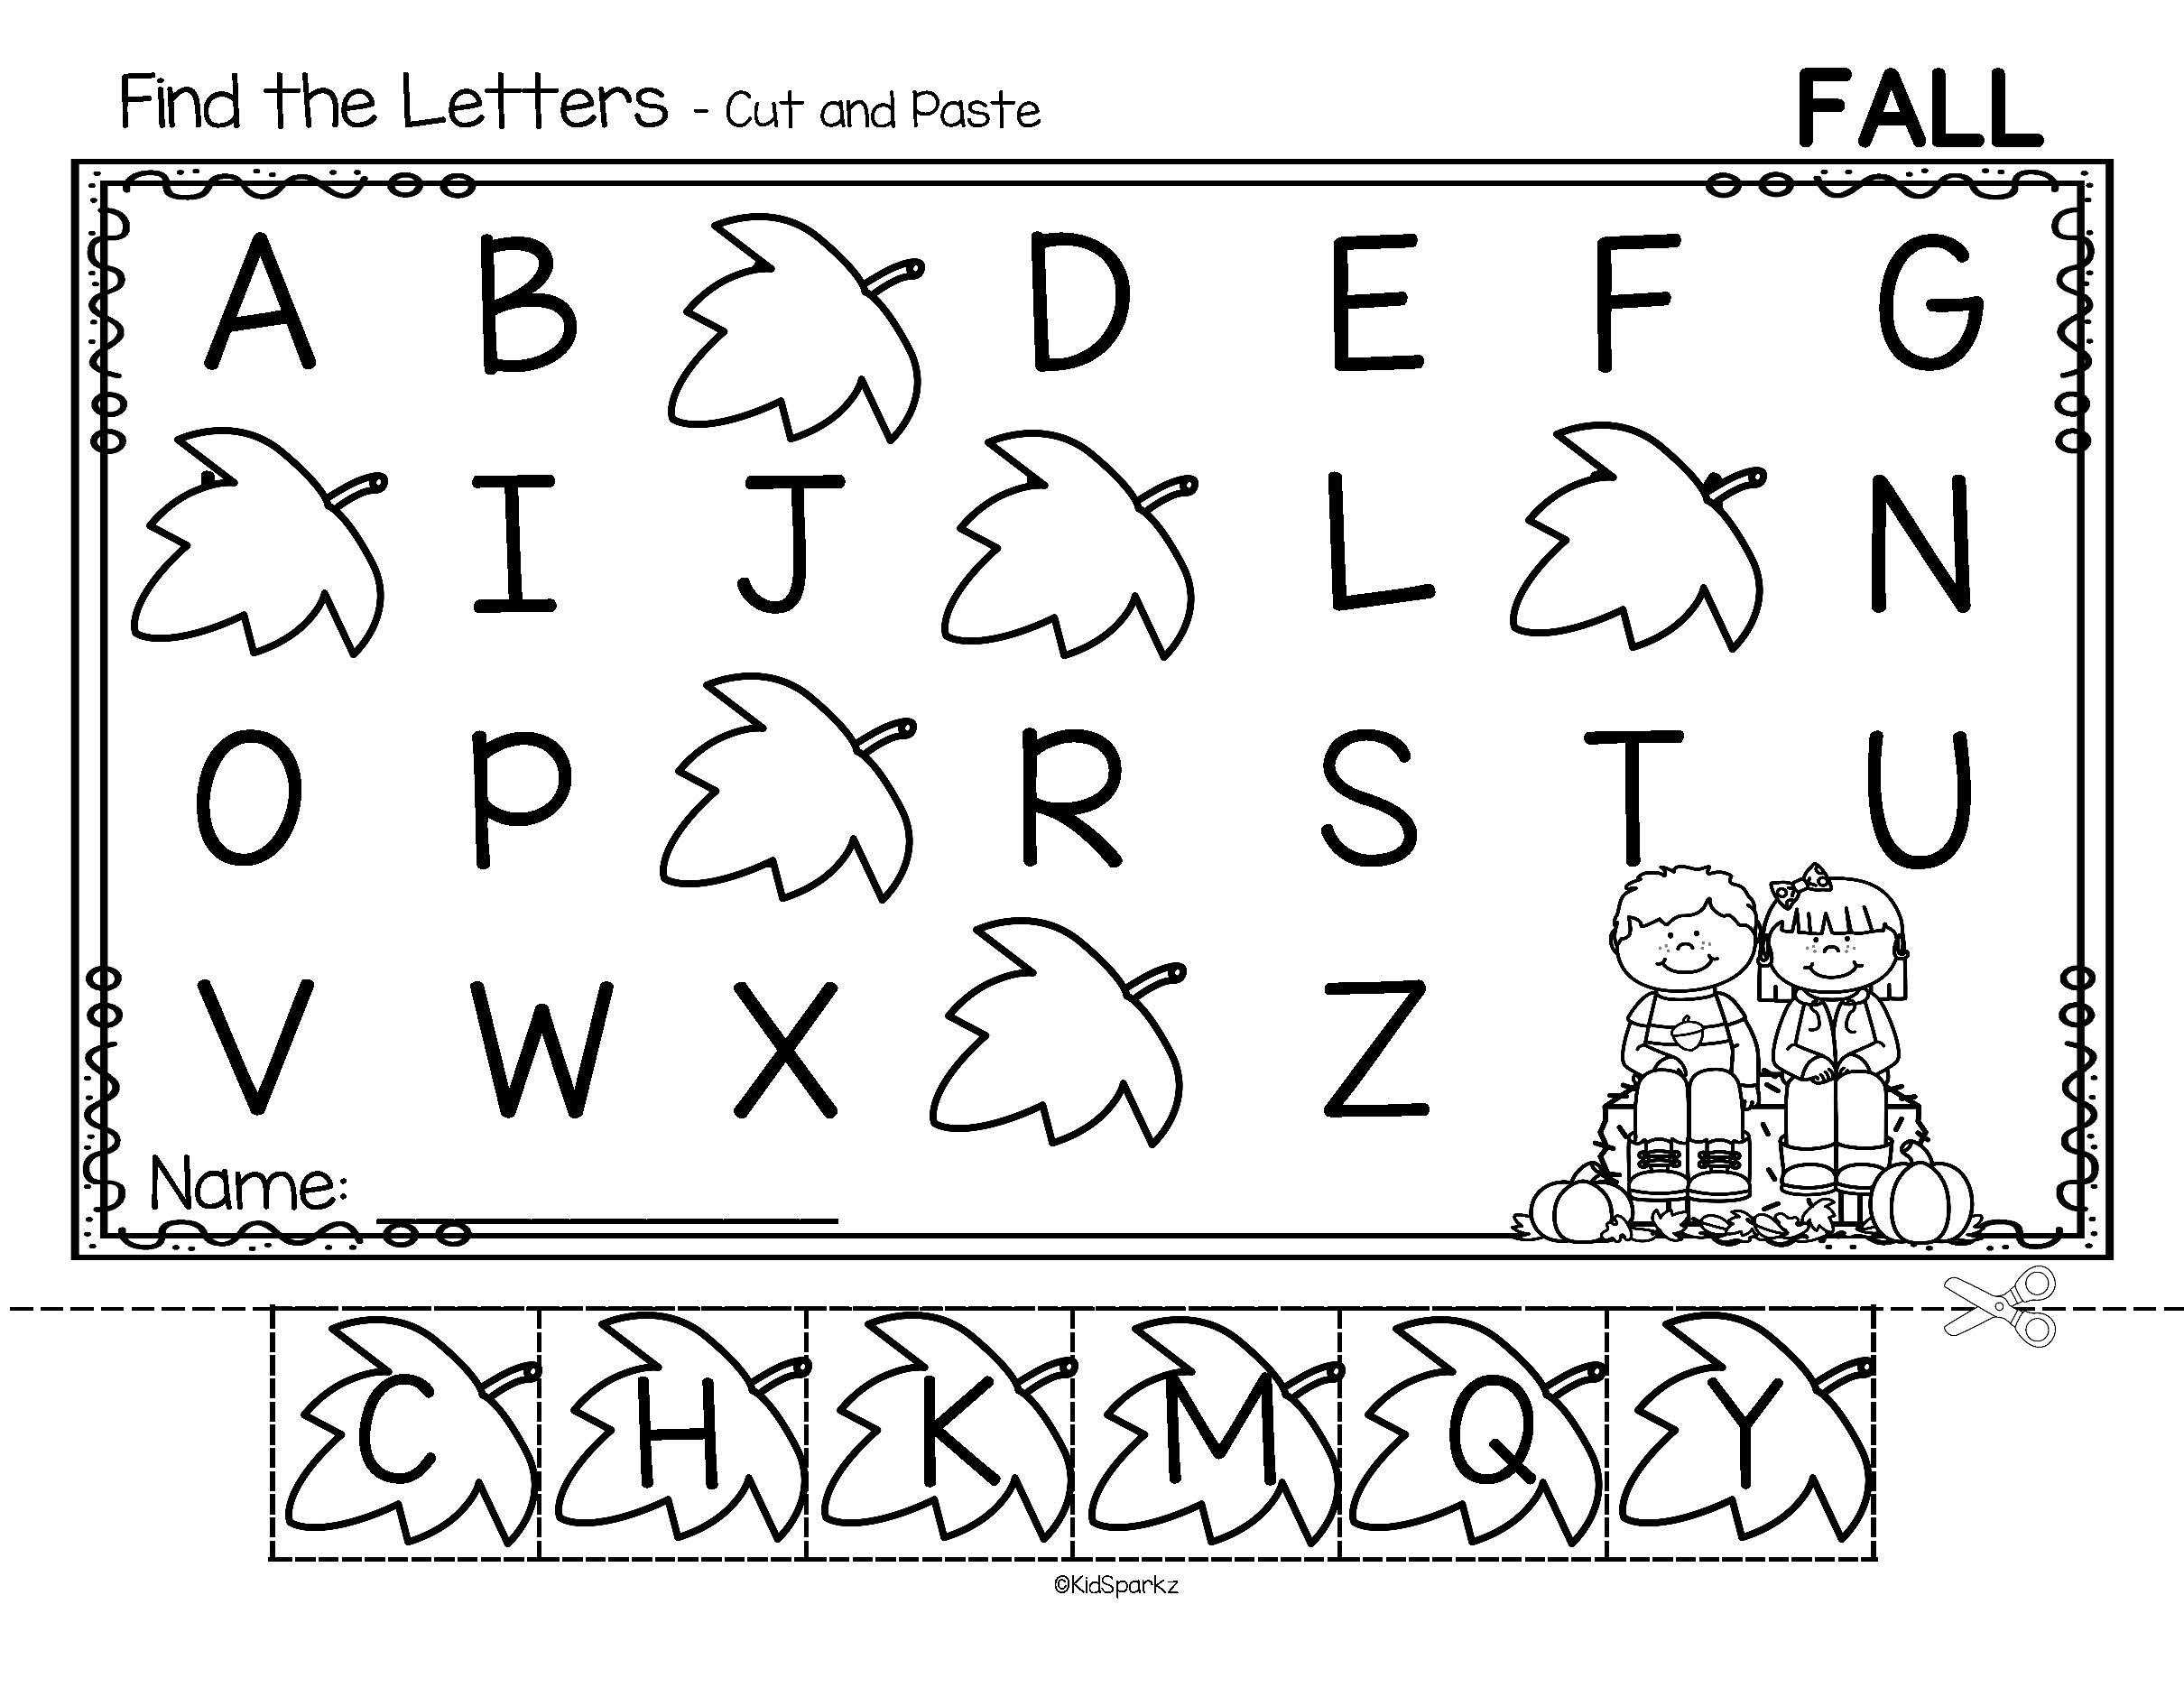 alphabet-order-cut-and-paste-worksheets-using-preschool-themes